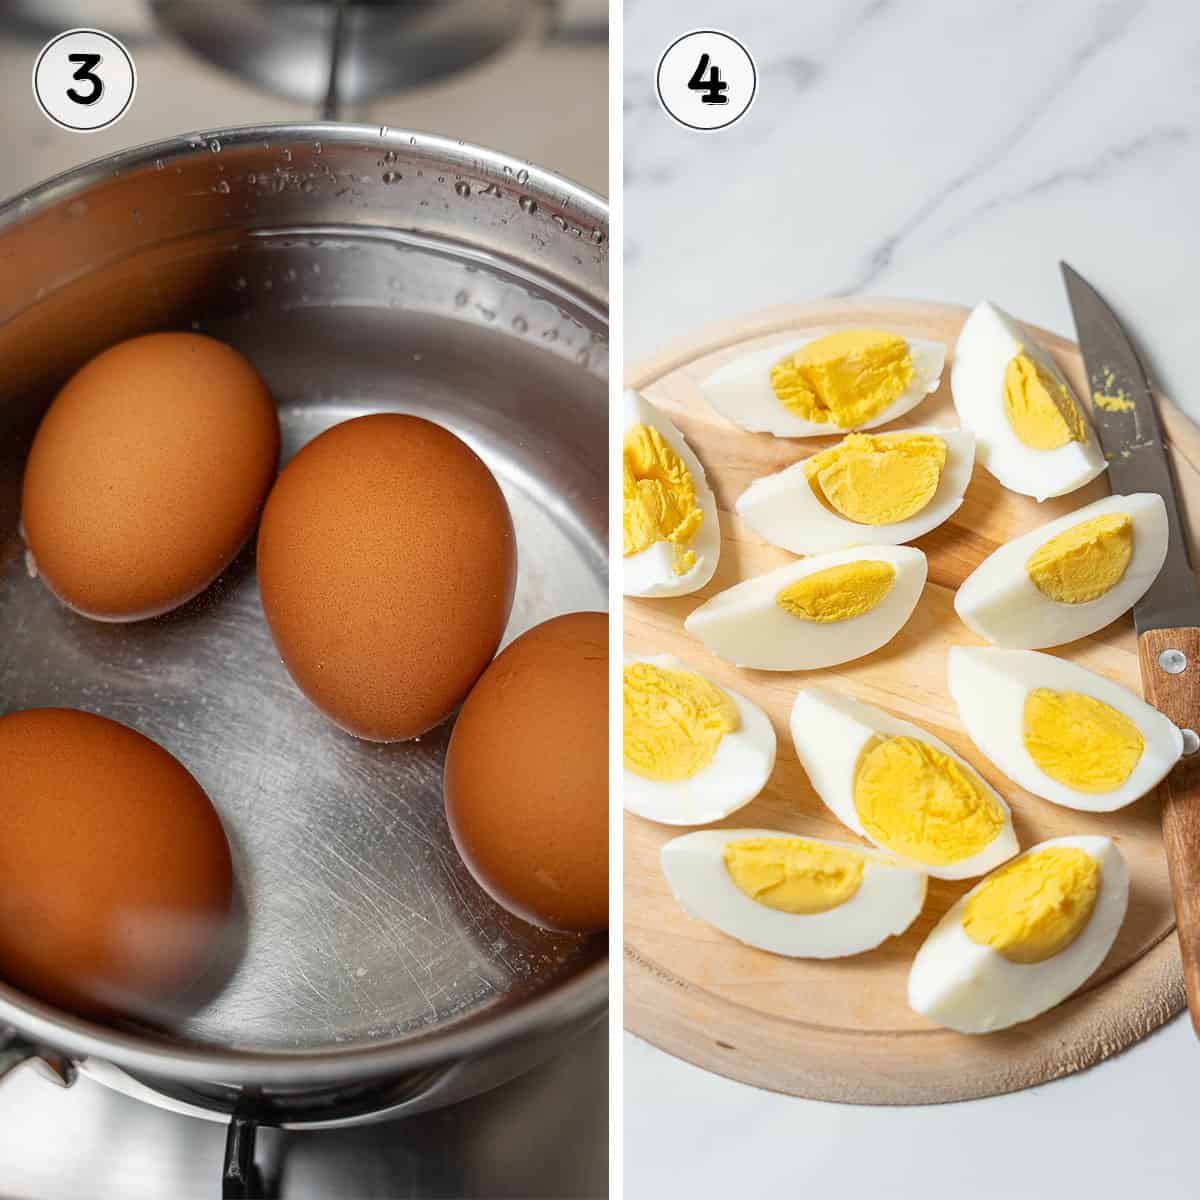 boiled eggs in water and sliced in quarters.